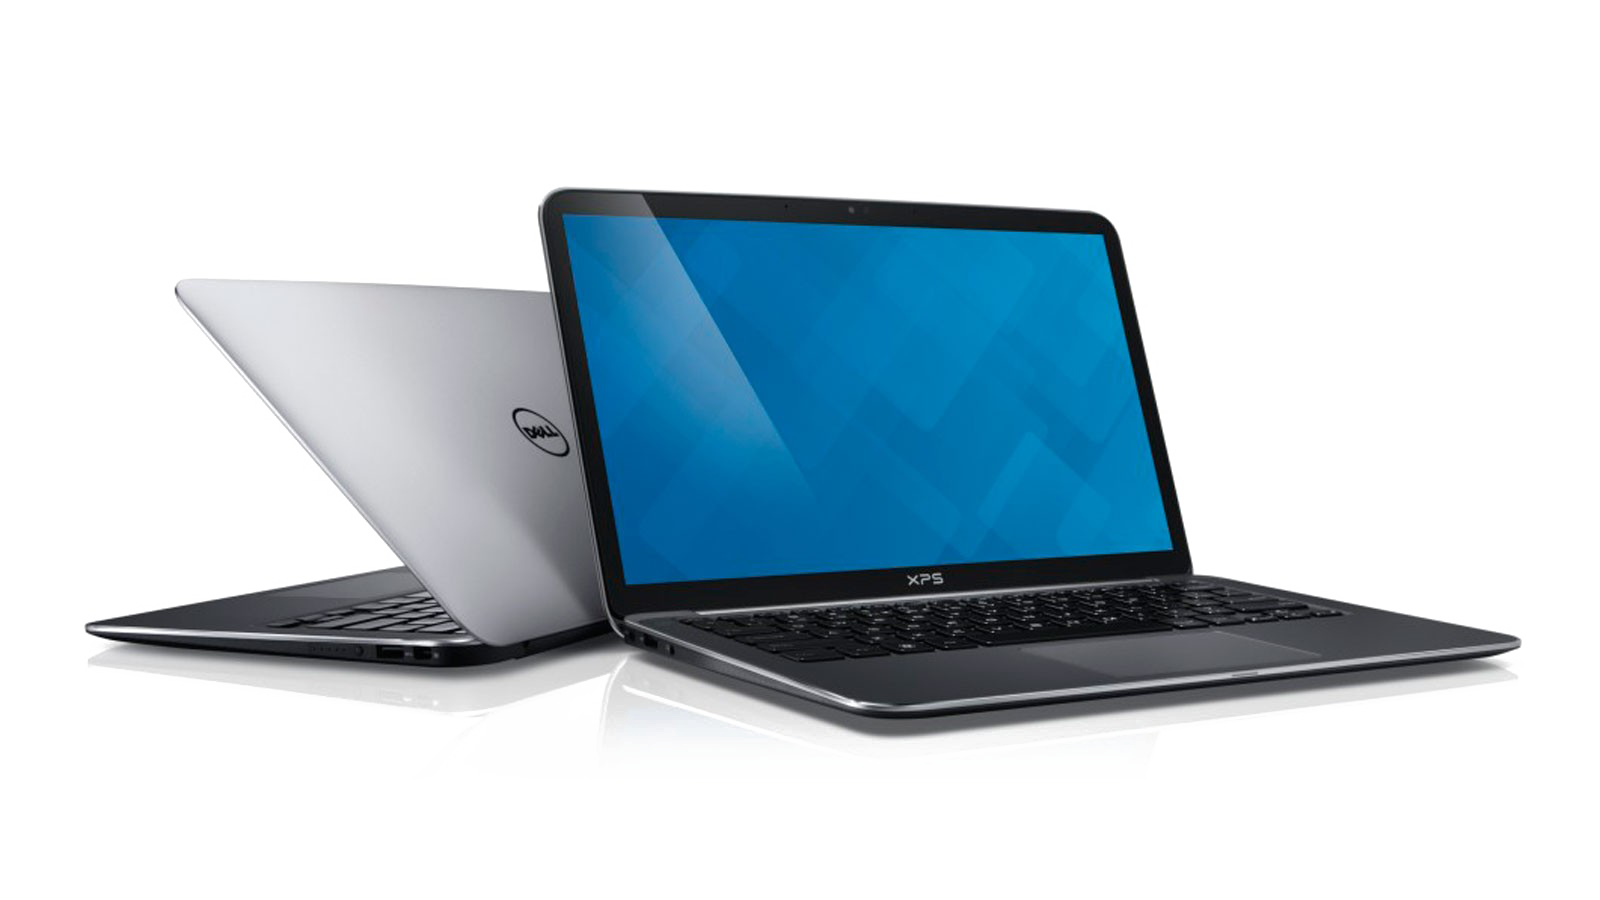 Dell Laptop Png Background Image Laptop Photo High Resolution 1600x900 Wallpaper Teahub Io